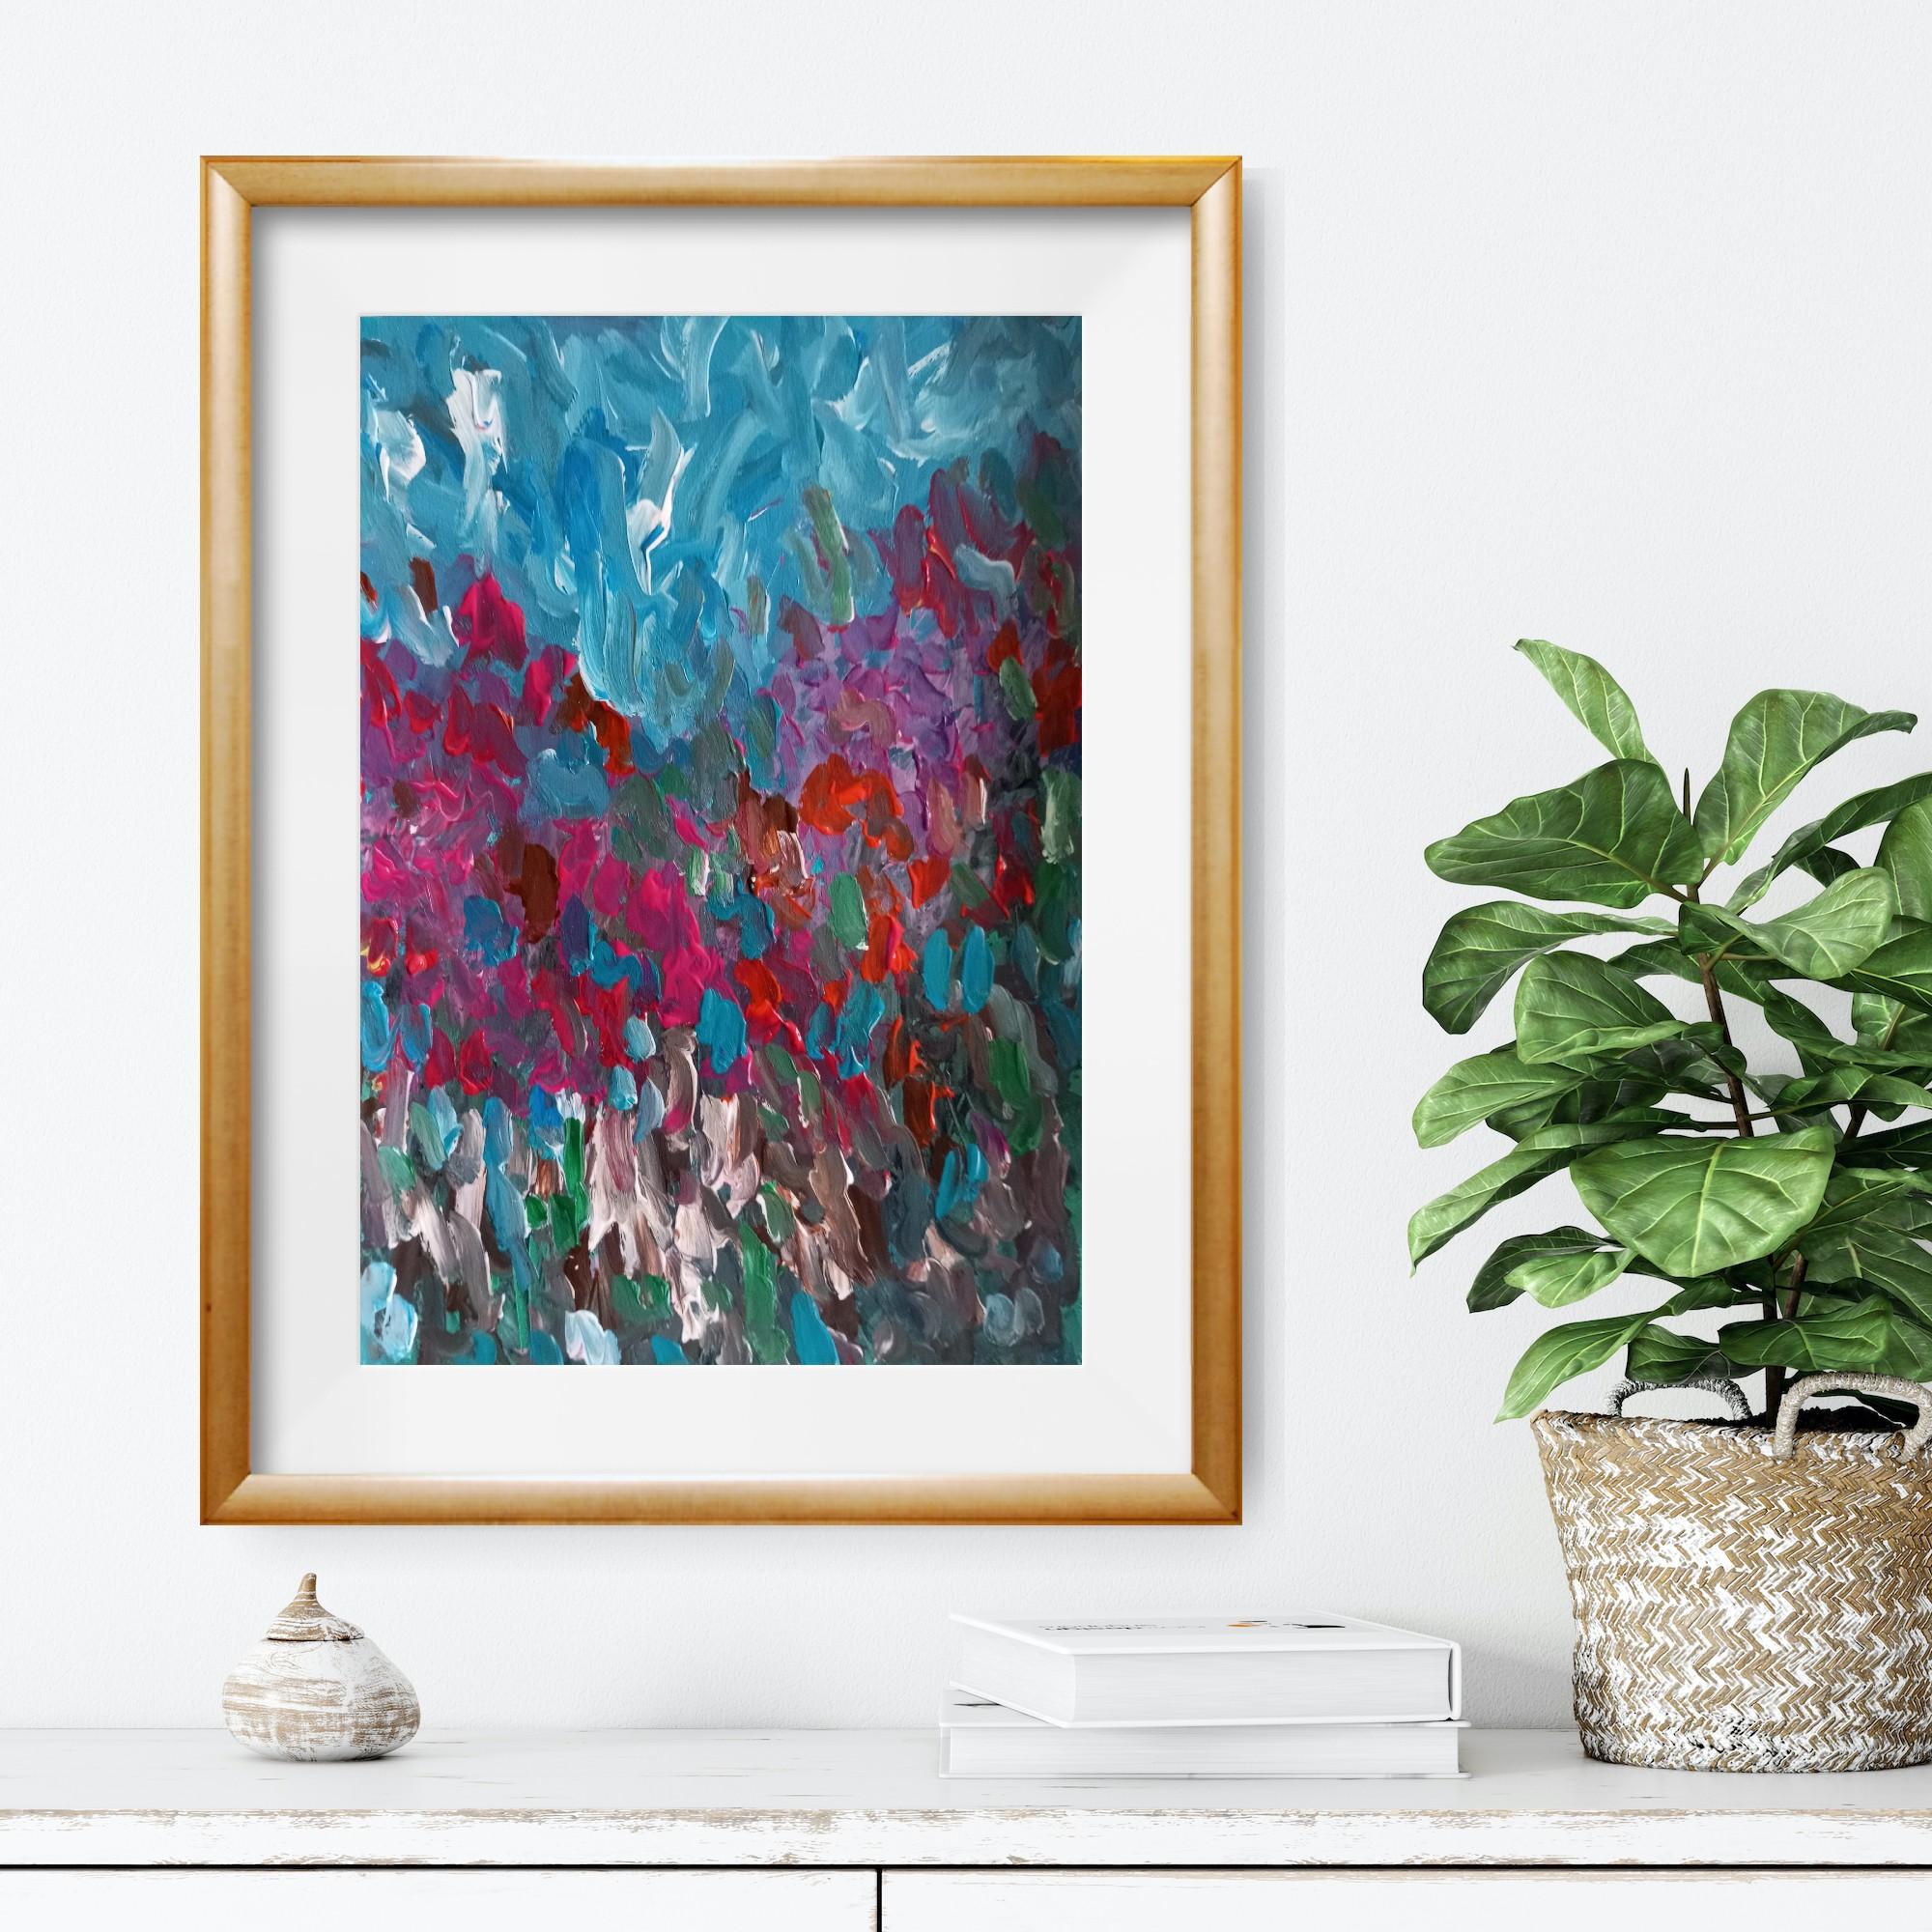 In this abstract floral artwork I experience the world of nature through the bright colors of a spring period.

While painting, I sought to capture the beauty of spring flowers which are full of different colors.

In my art practice I love to use